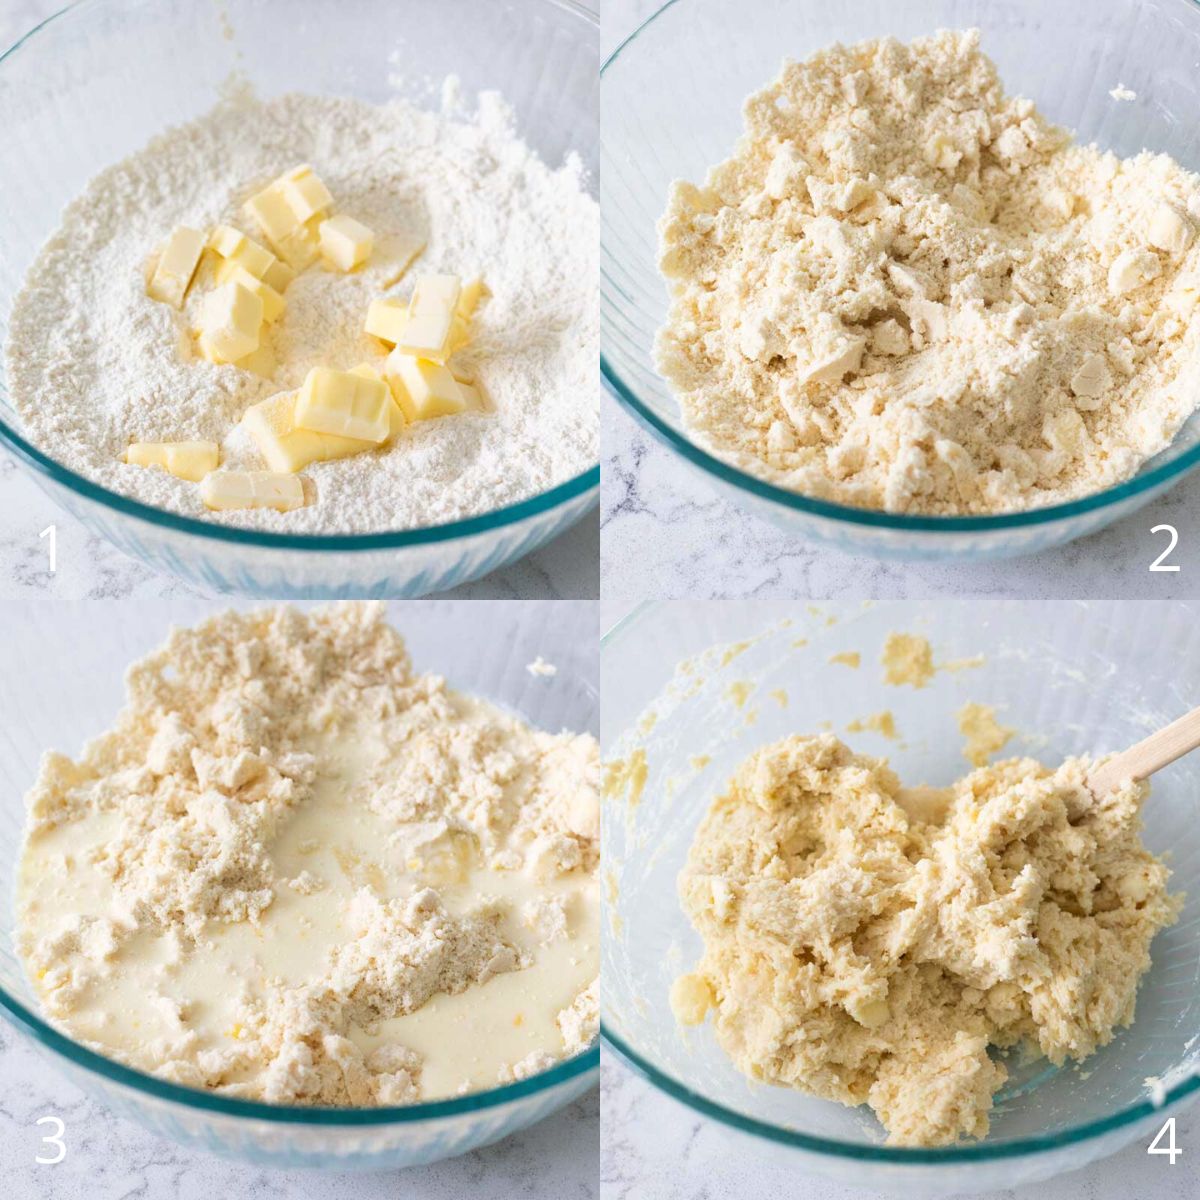 The step by step photos show how to cut the butter into the flour and add milk to make the cobbler dough.